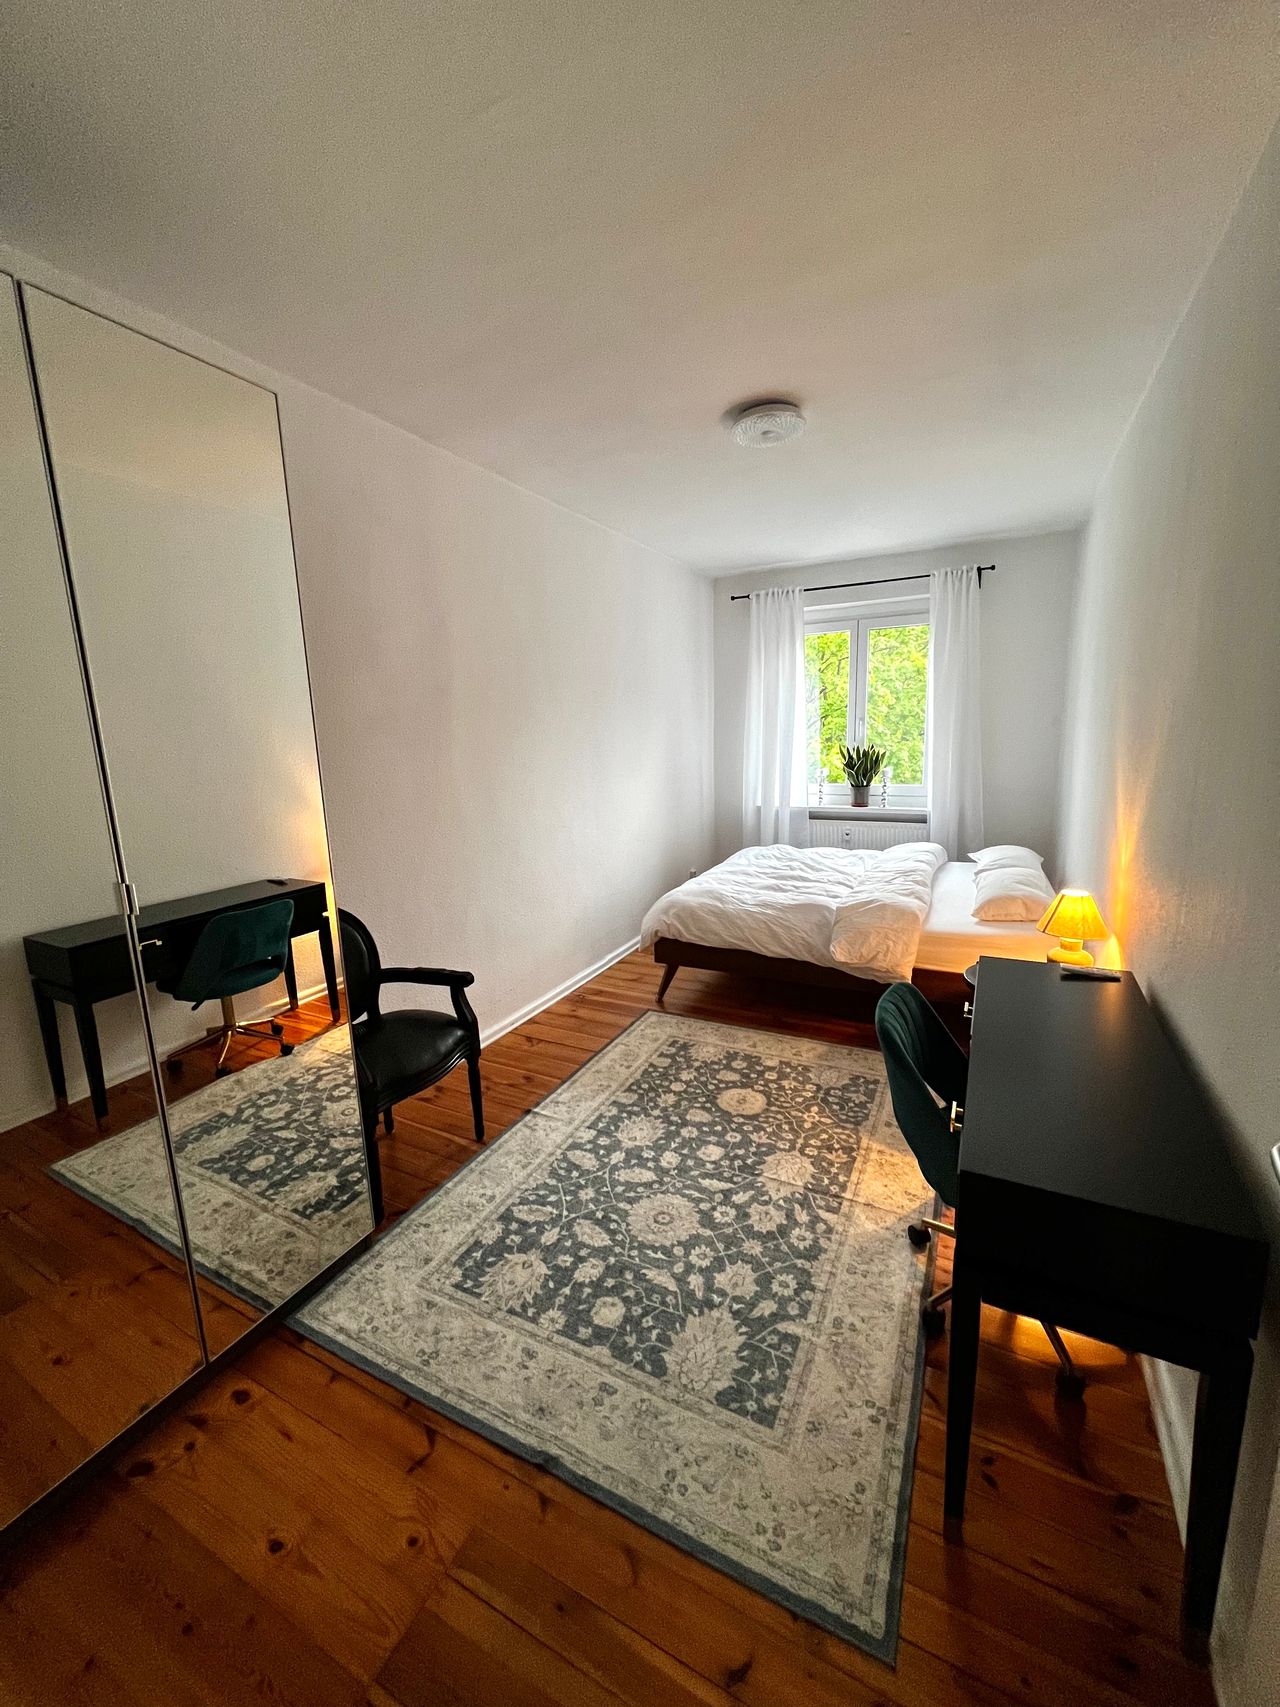 Private furnished apartment in quite environment in Prenzlauer Berg